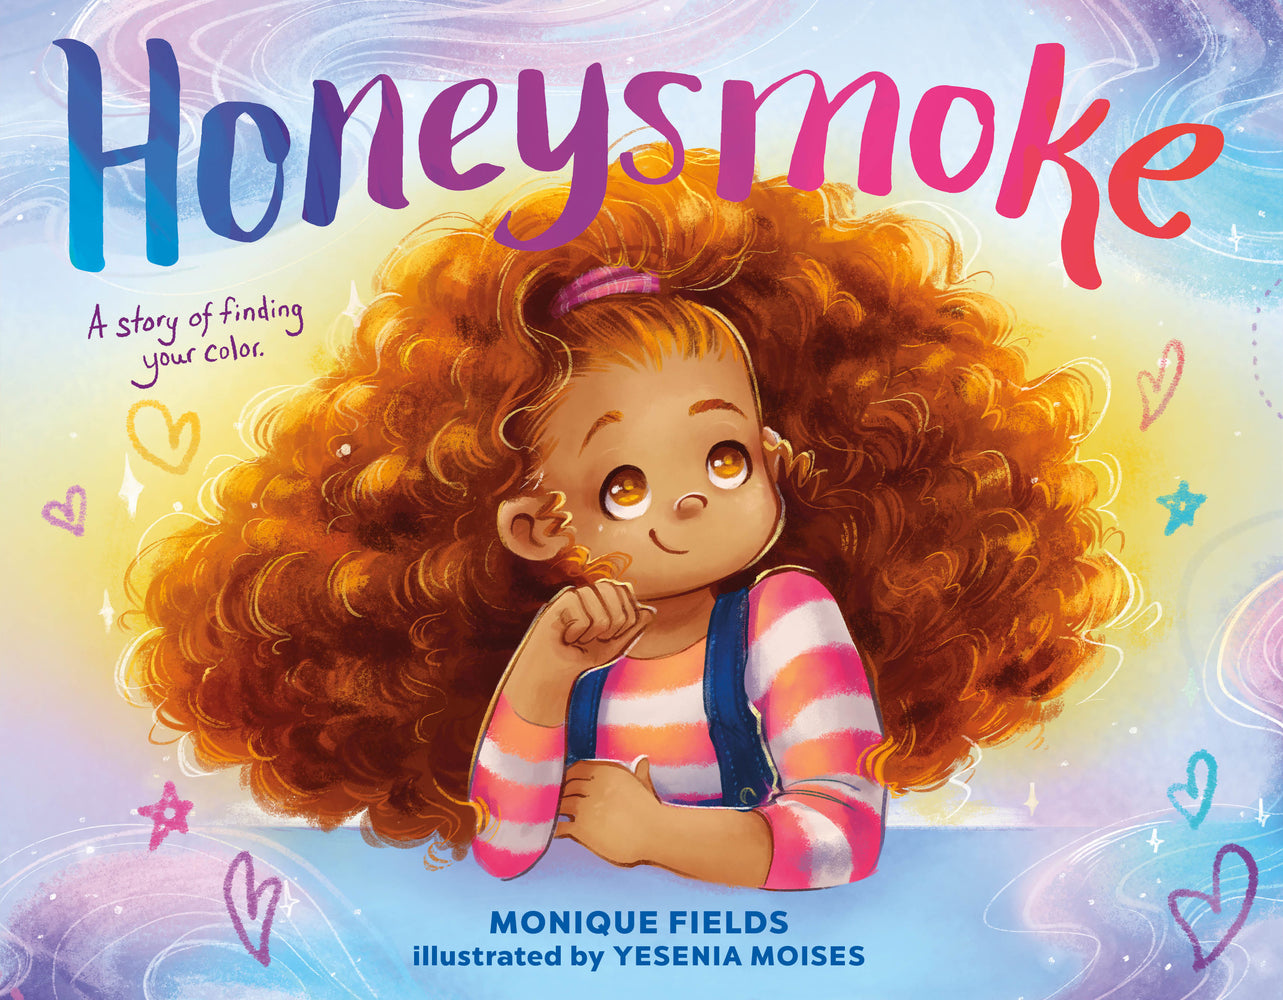 Honeysmoke // A Story of Finding Your Color